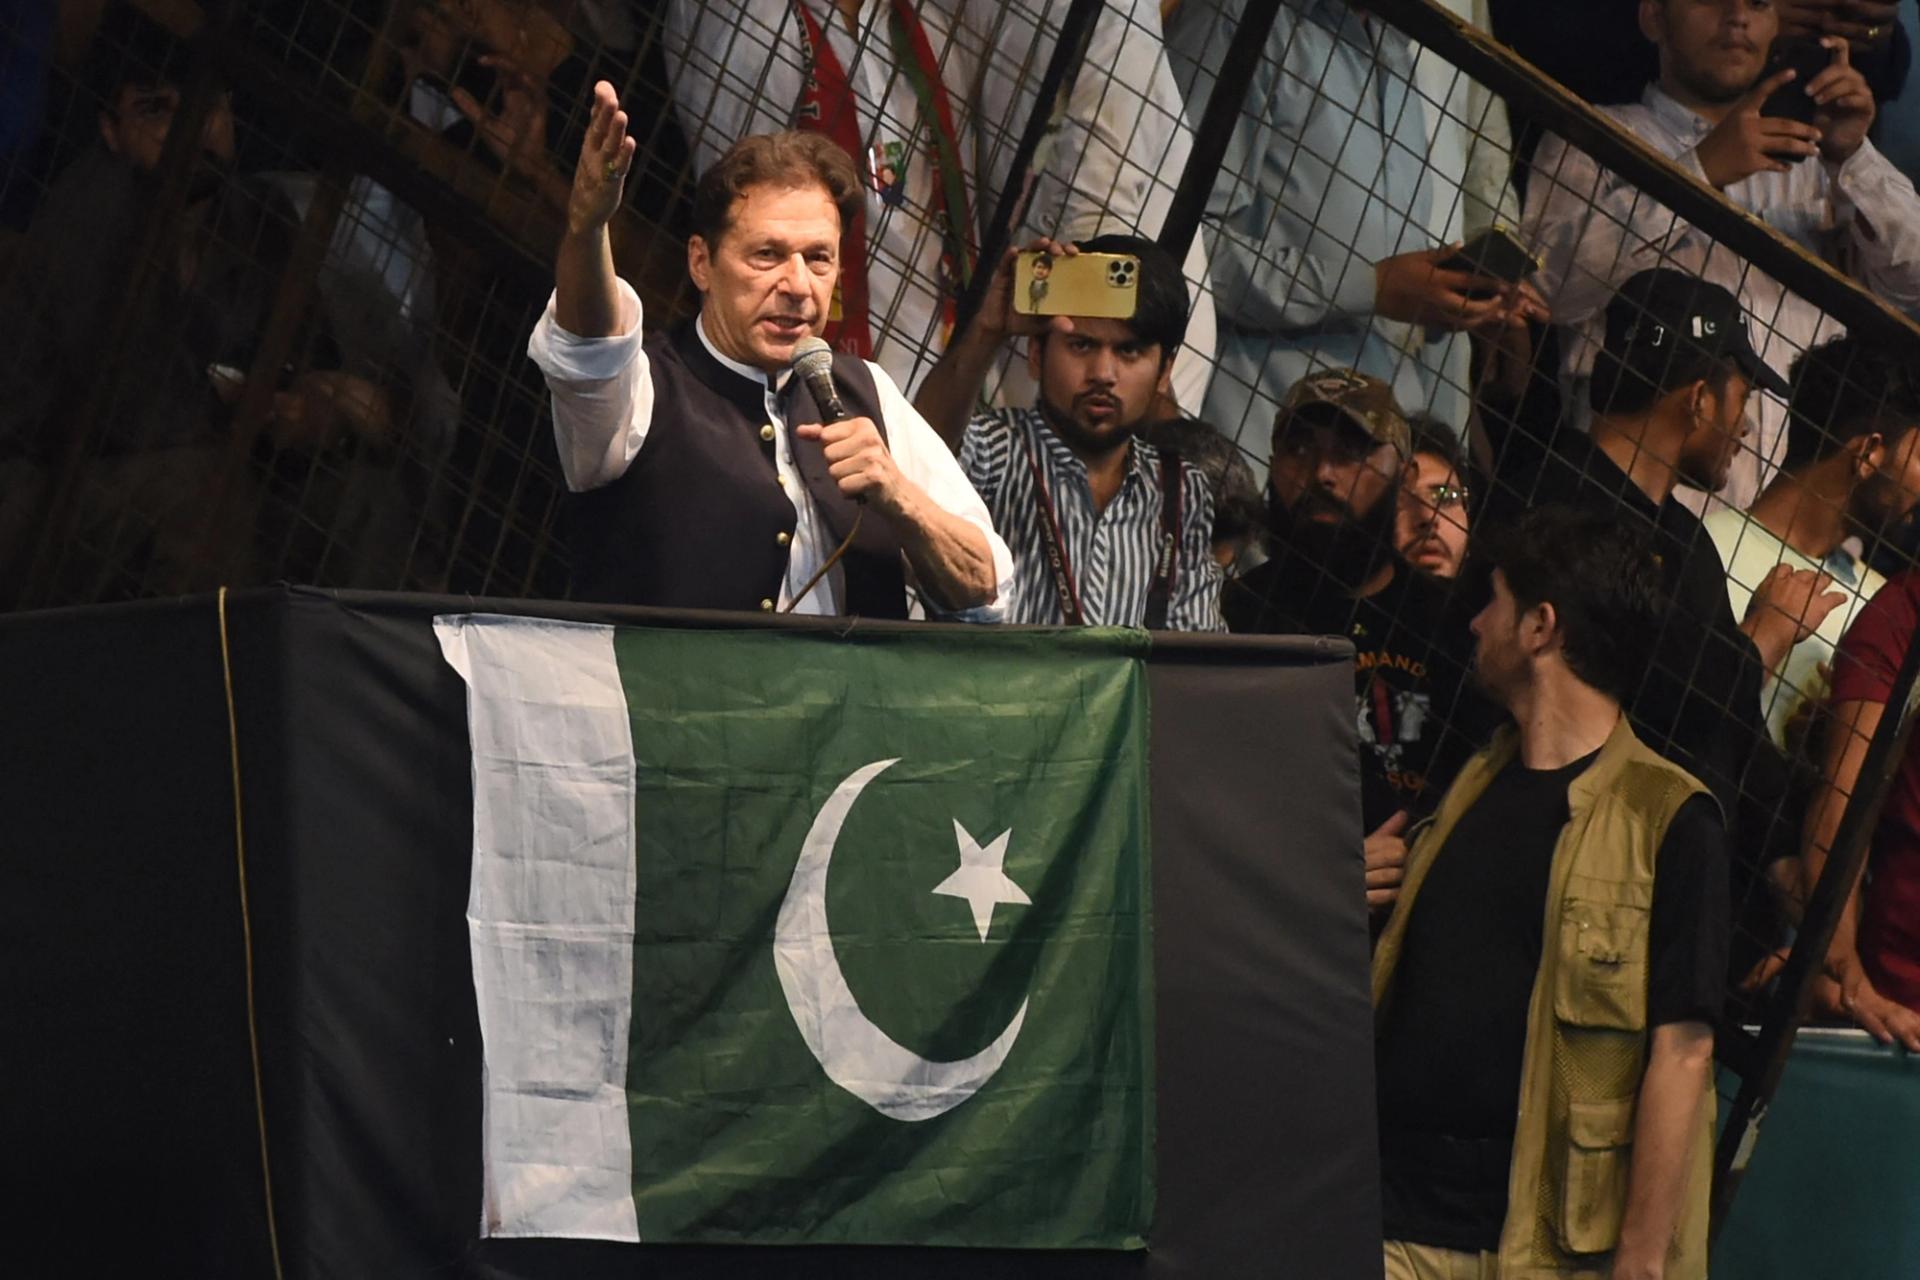 Pakistan's former Prime Minister Imran Khan delivers a speech to his supporters on Aug. 13, 2022. Khan is currently jailed.